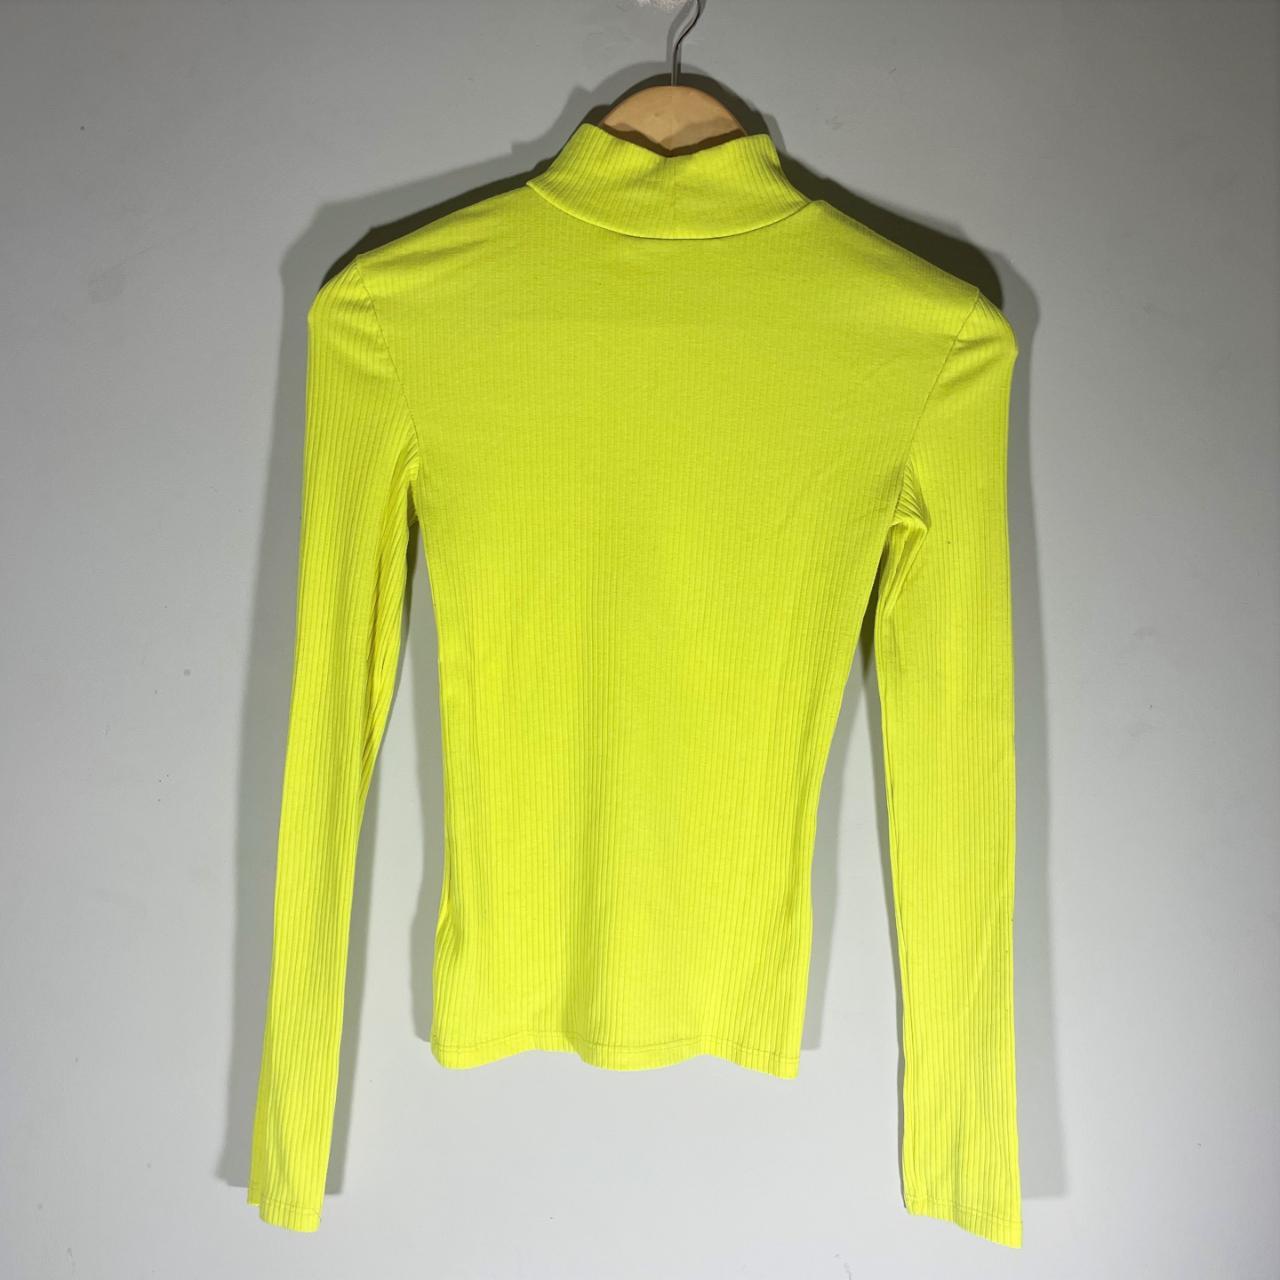 Bright yellow turtleneck shirt. A ribbed-style... - Depop